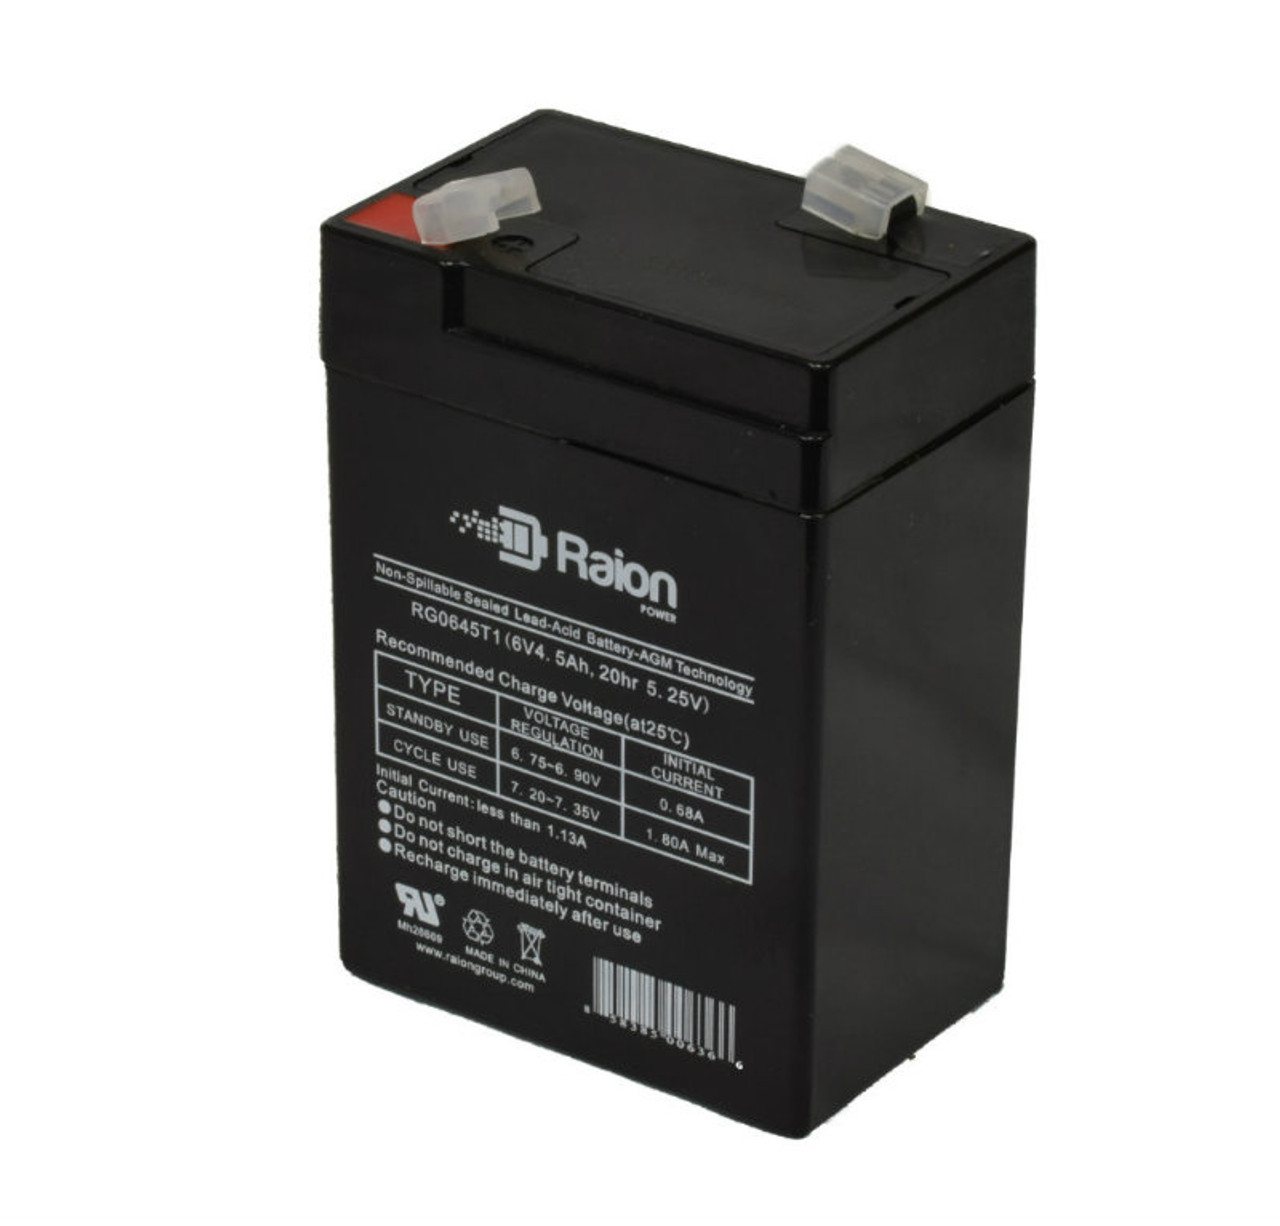 Raion Power RG0645T1 6V 4.5Ah Replacement Battery Cartridge for Flying Power NS6-4